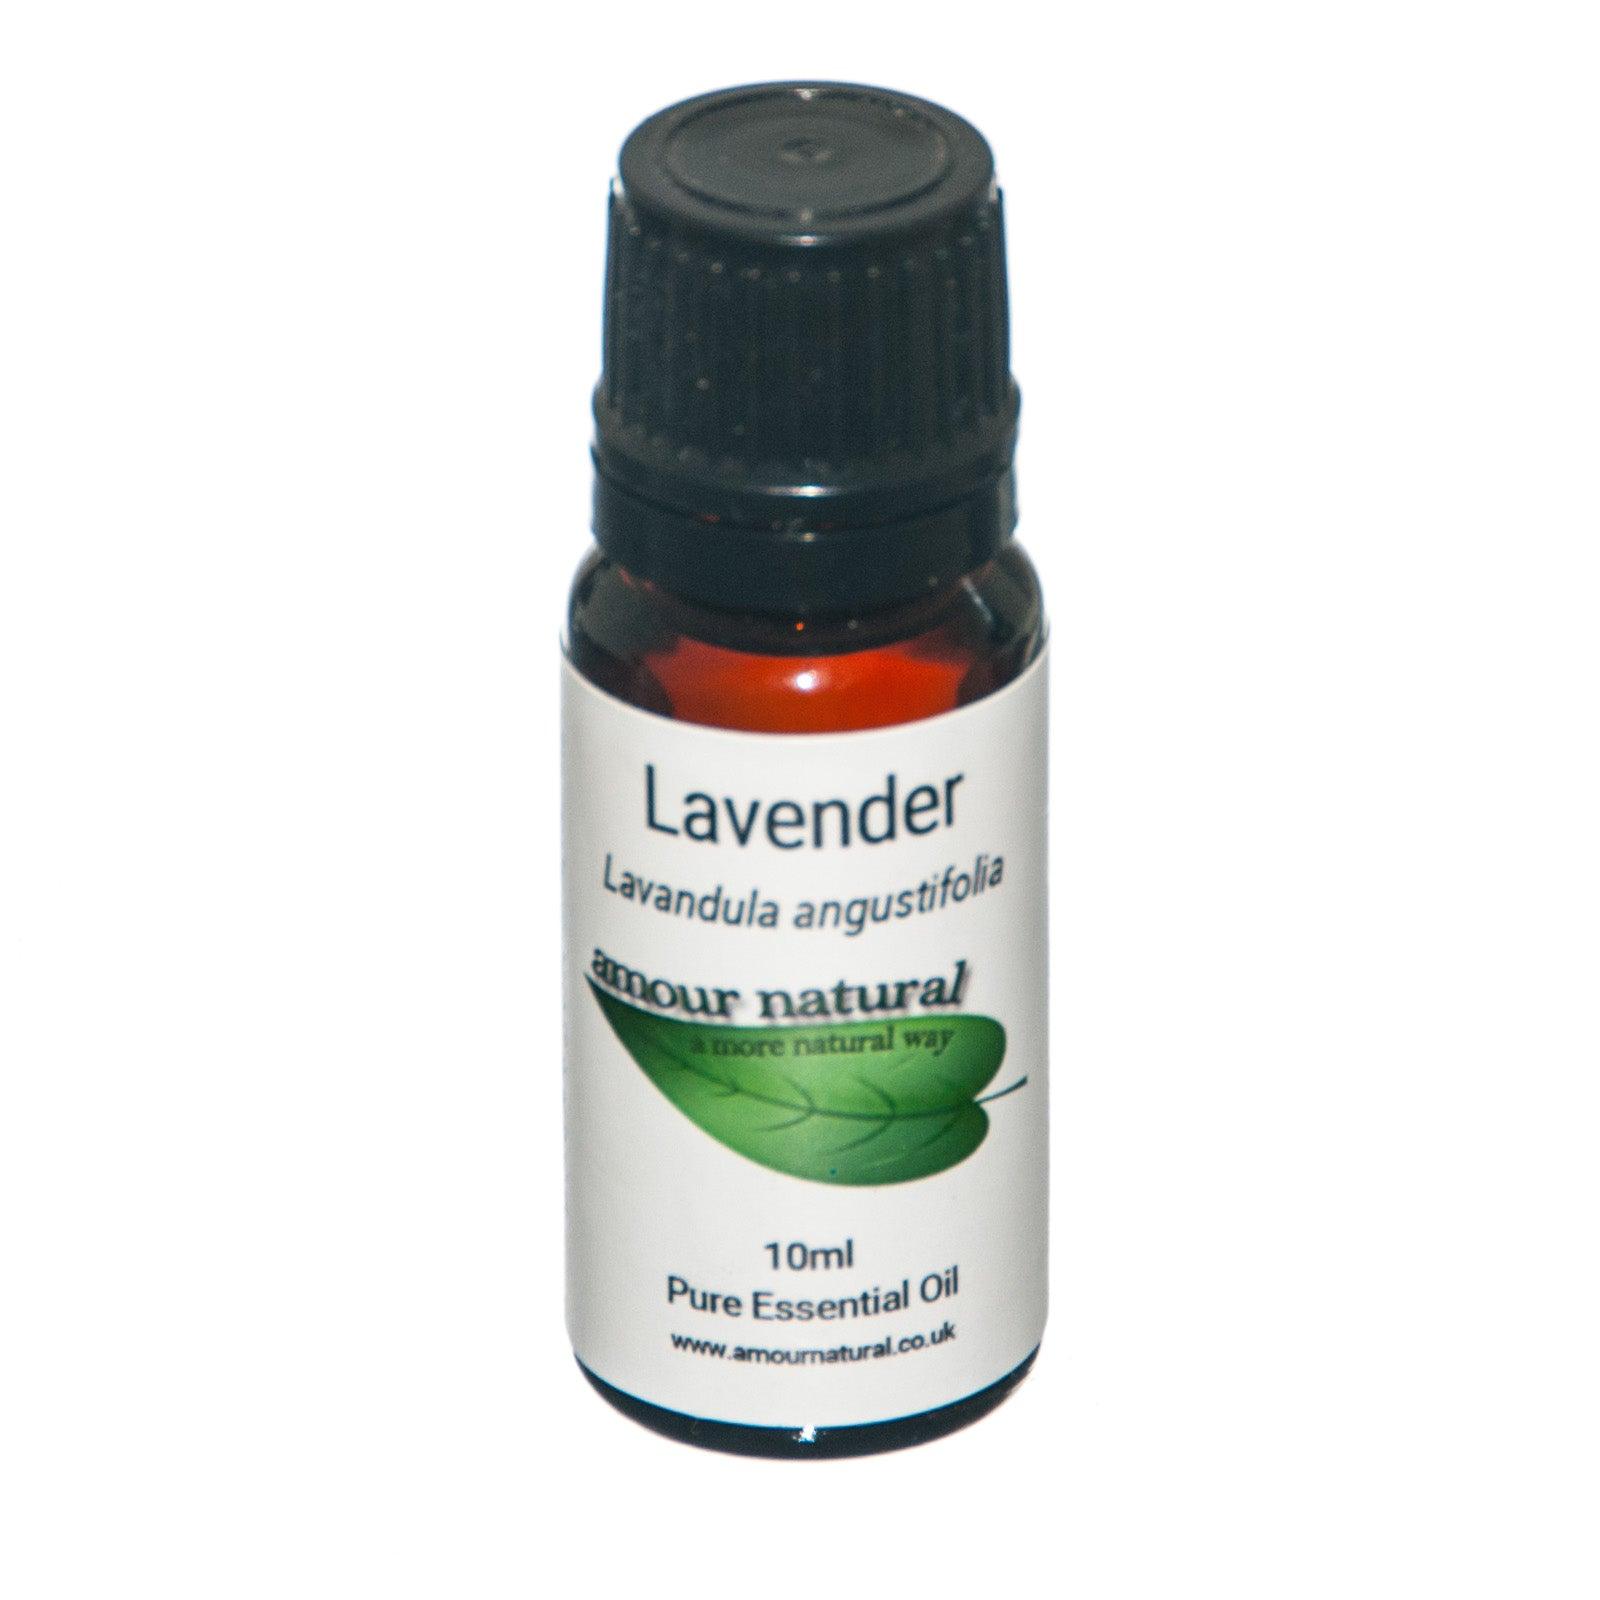 Amour Natural Lavender Oil 10ml - Approved Vitamins